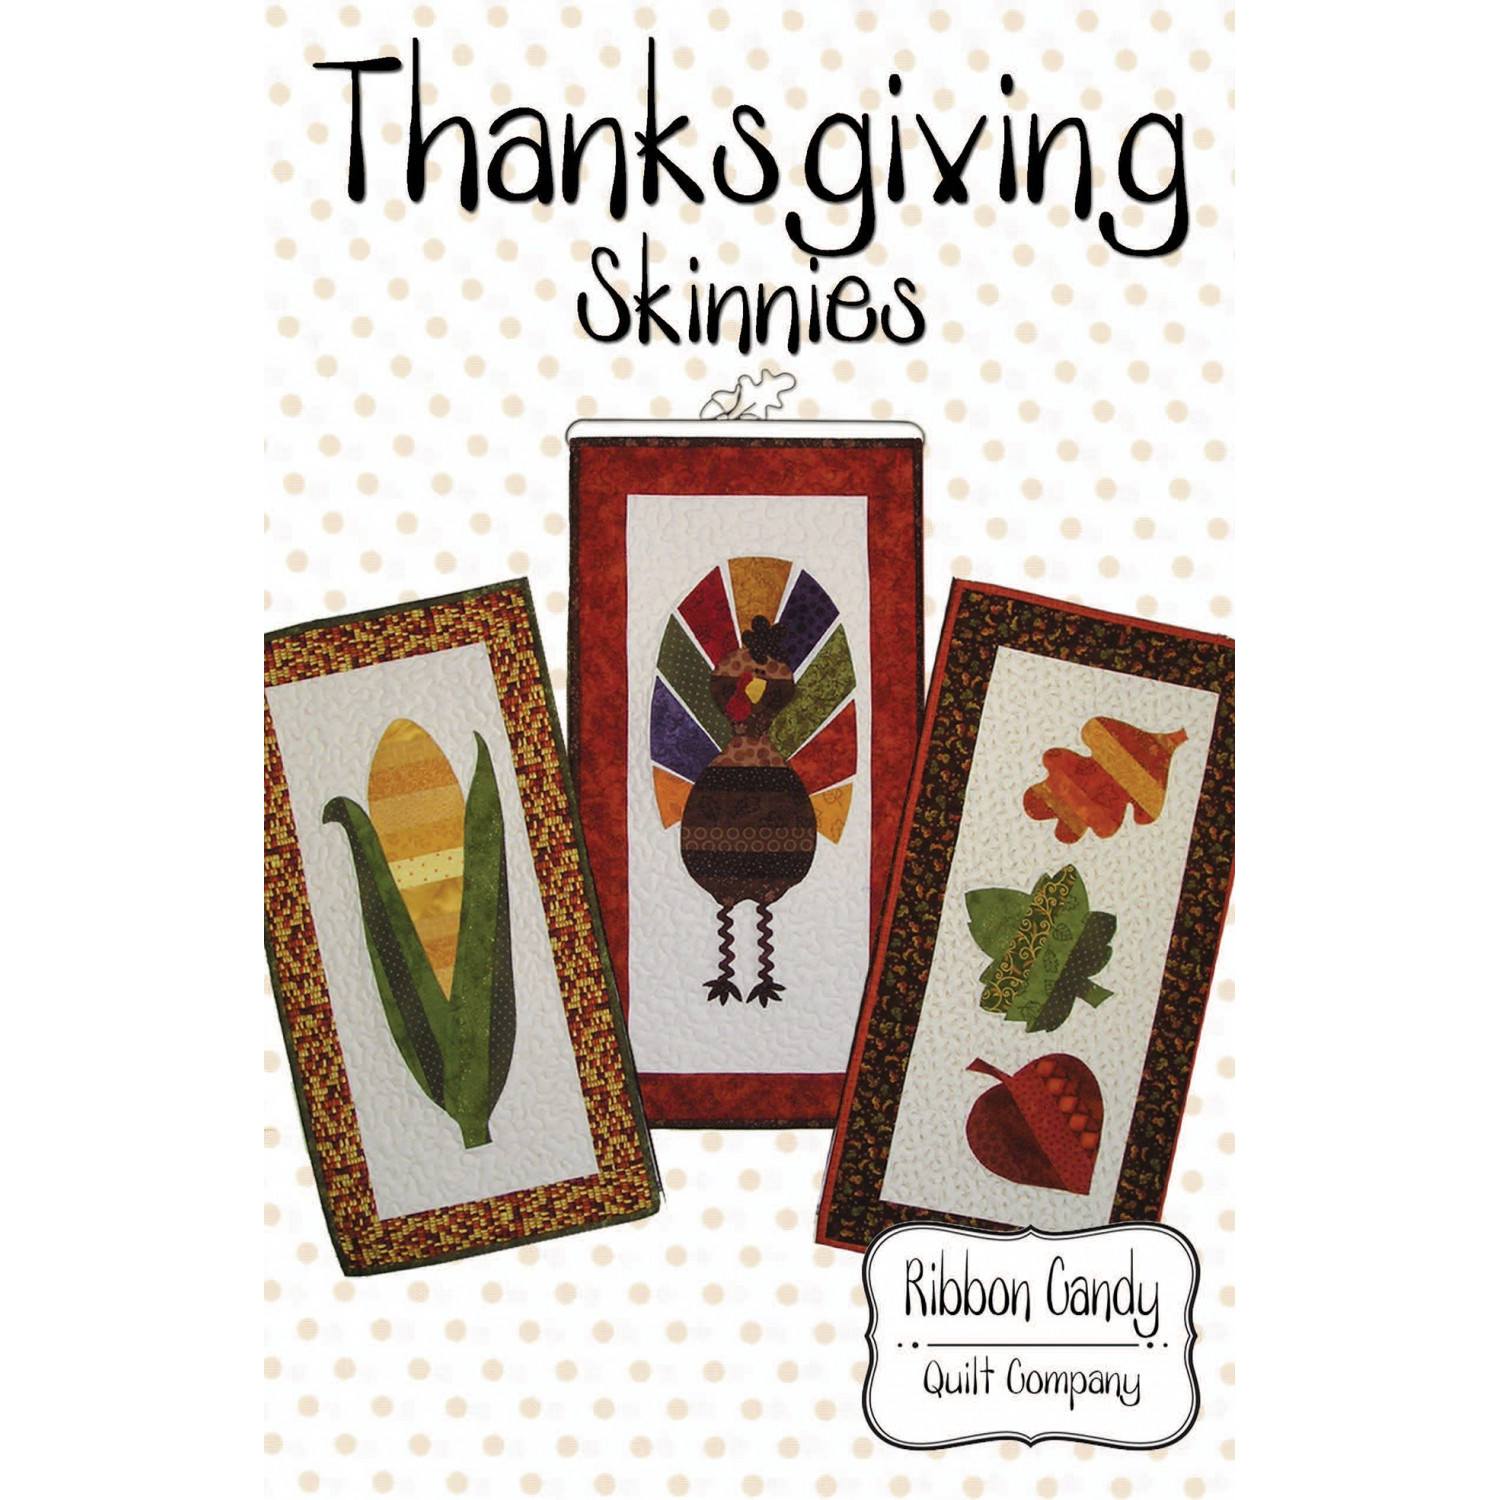 Thanksgiving Skinnies Pattern, Ribbon Candy Quilt Company image # 35320